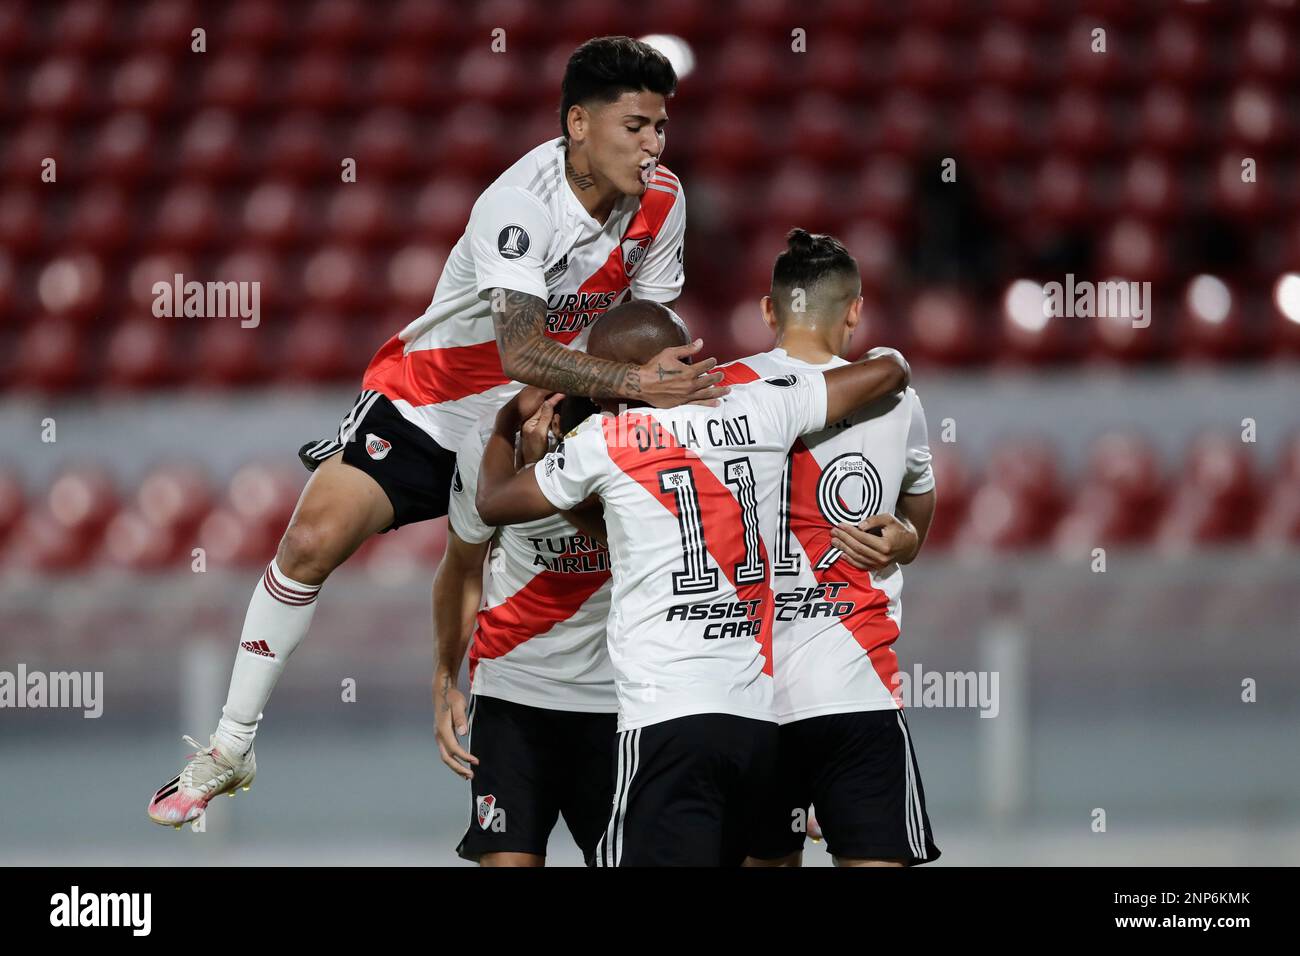 Players of Argentina's River Plate celebrate their side's opening goal scored by teammate Gonzalo Montiel from the penalty spot during a Copa Libertadores quarterfinal first leg soccer match against Uruguay's Nacional at the Libertadores de America stadium in Buenos Aires, Argentina, Thursday, Dec. 10, 2020. (Juan Ignacio Roncoroni/Pool via AP) Stock Photo